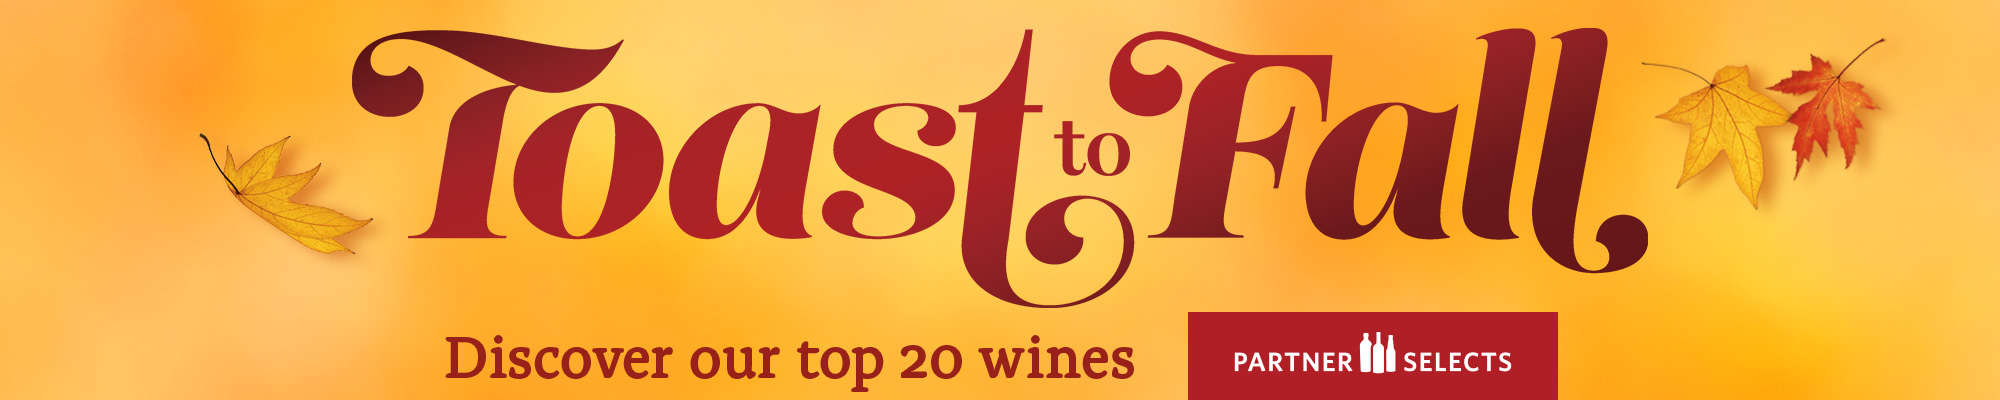 Toast to Fall - Discover Our Top 20 Wines